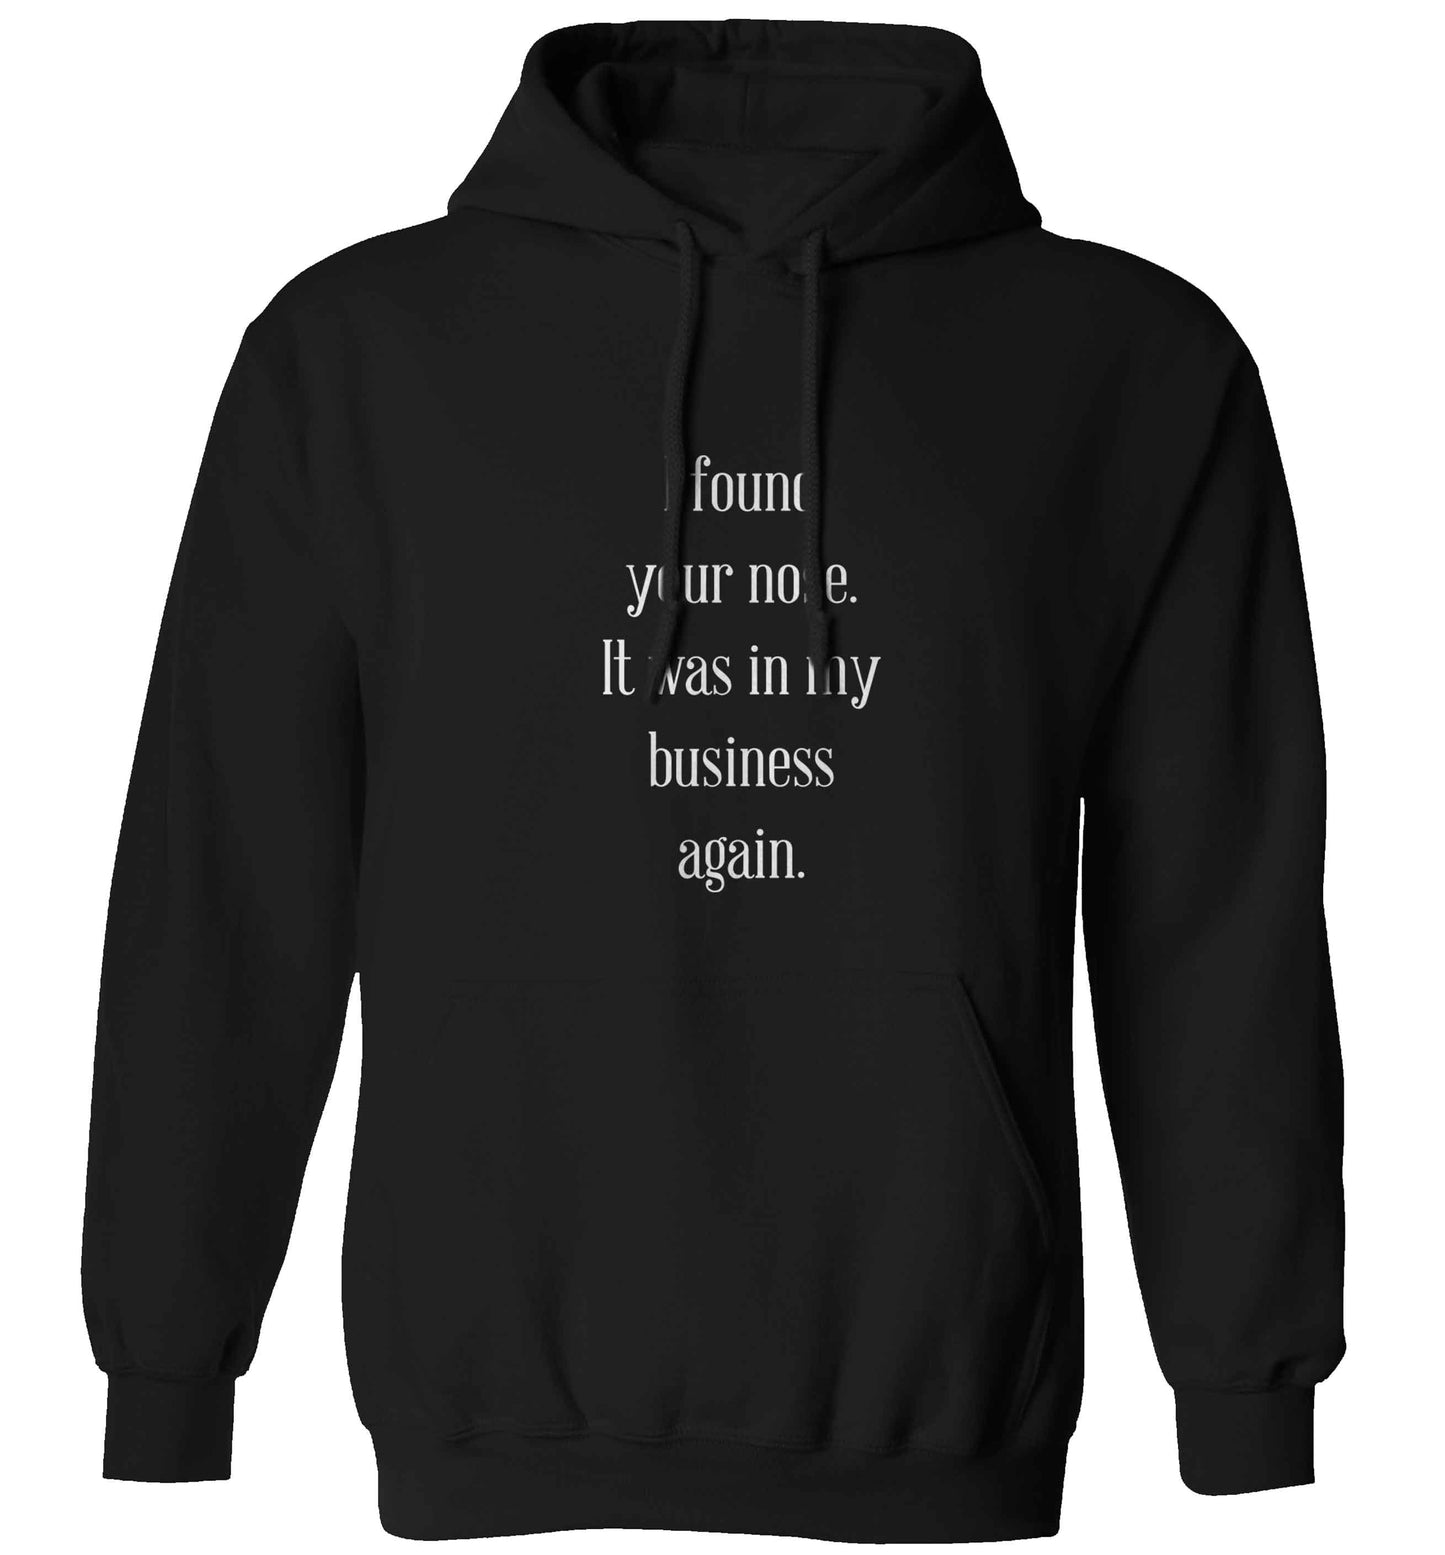 I found your nose it was in my business again adults unisex black hoodie 2XL